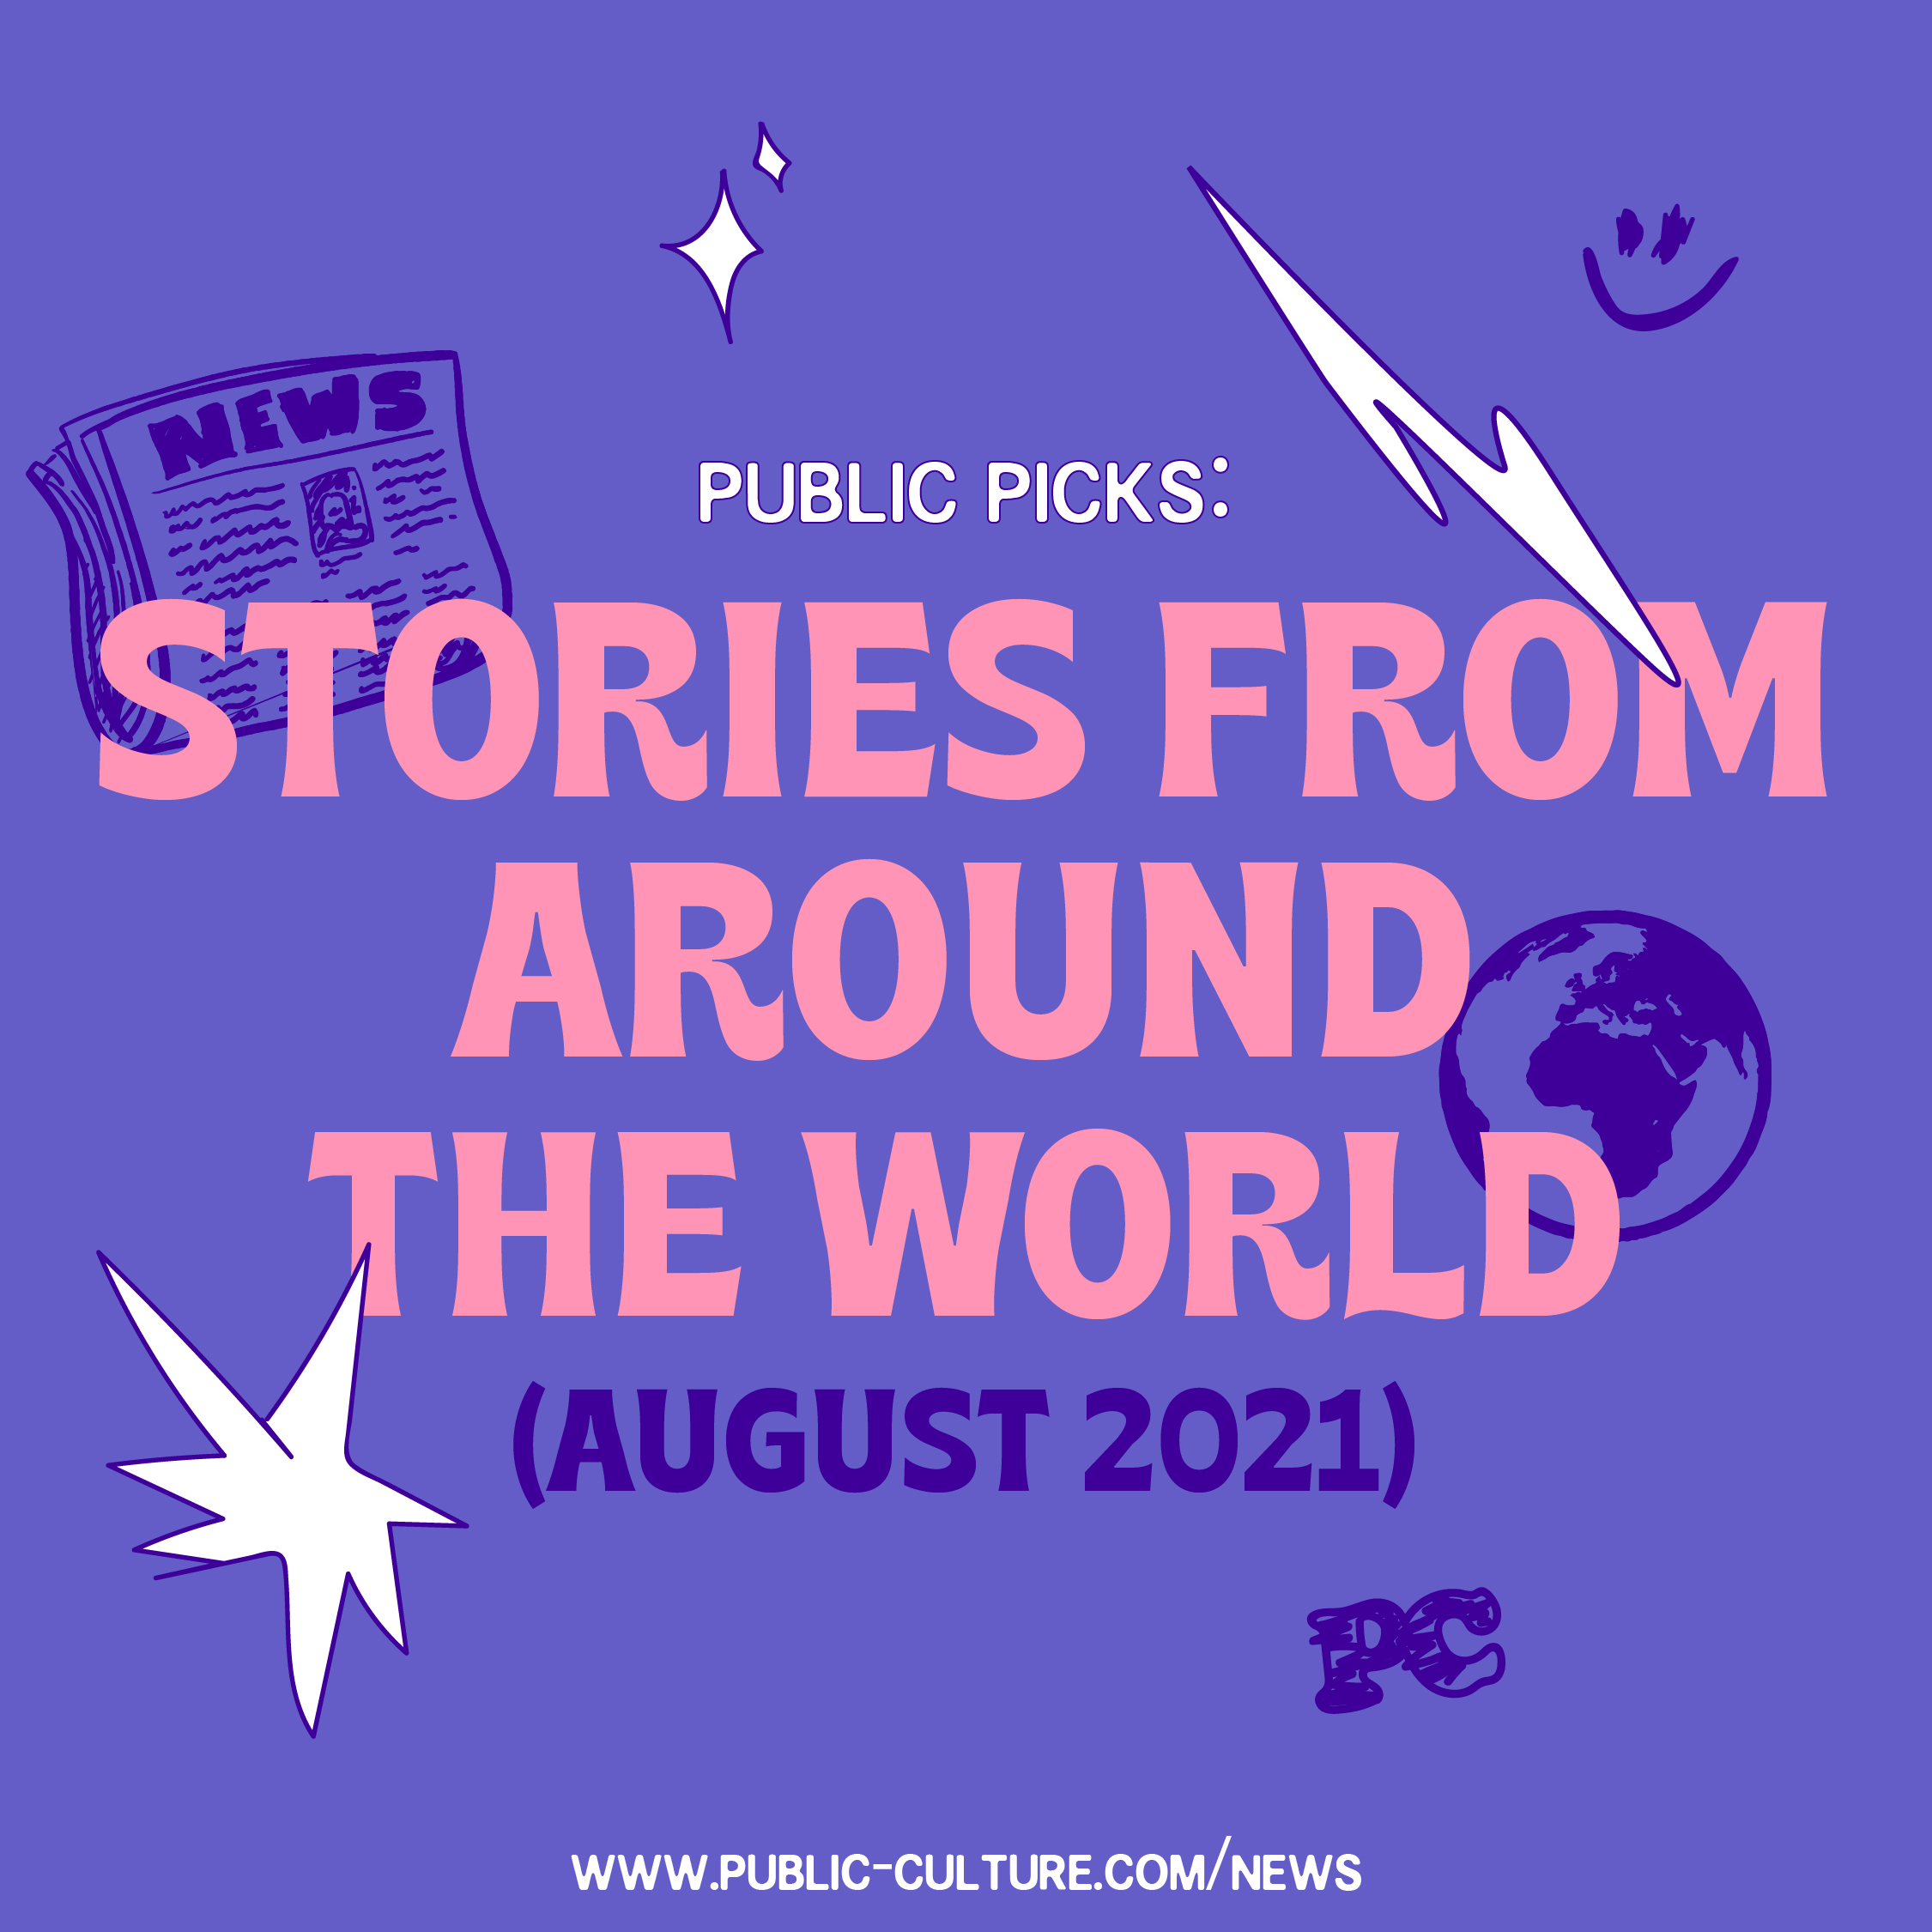 Public Picks: Stories From Around the World (August 2021)